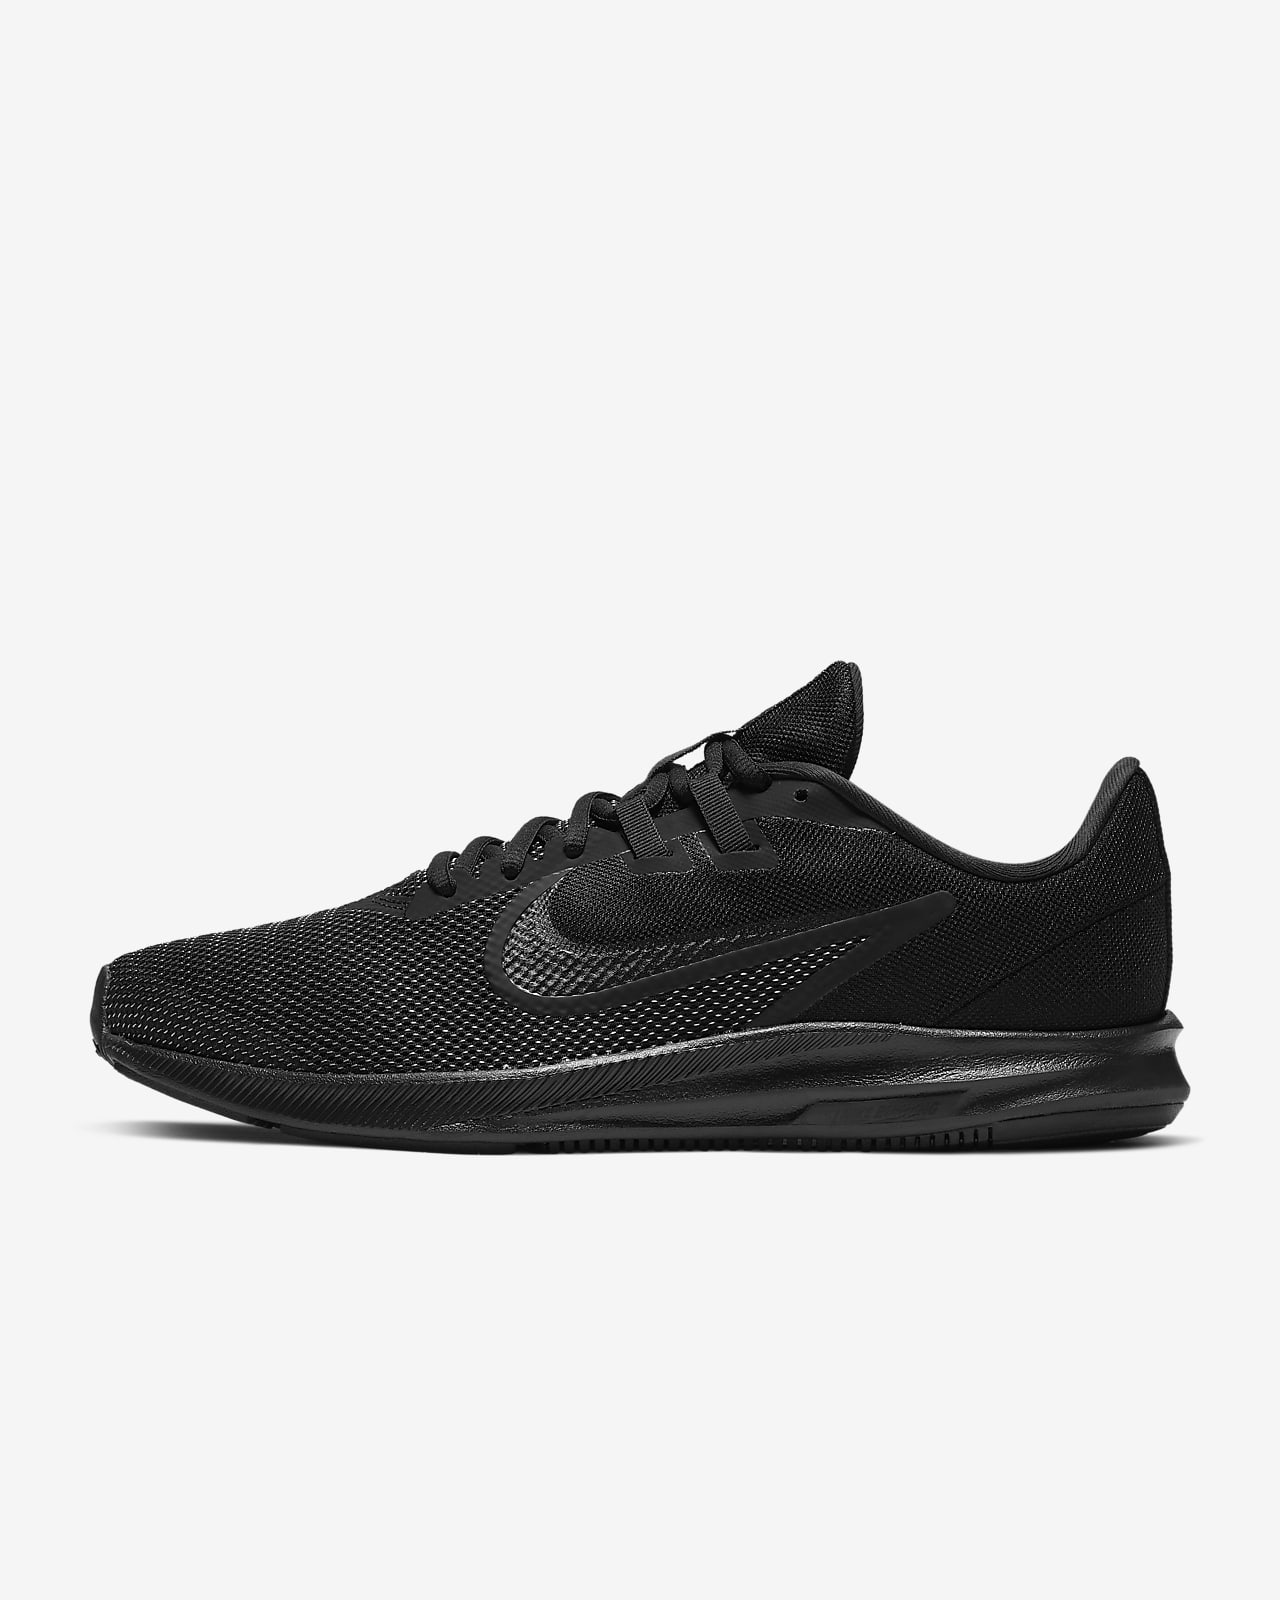 nike chaussure noire homme